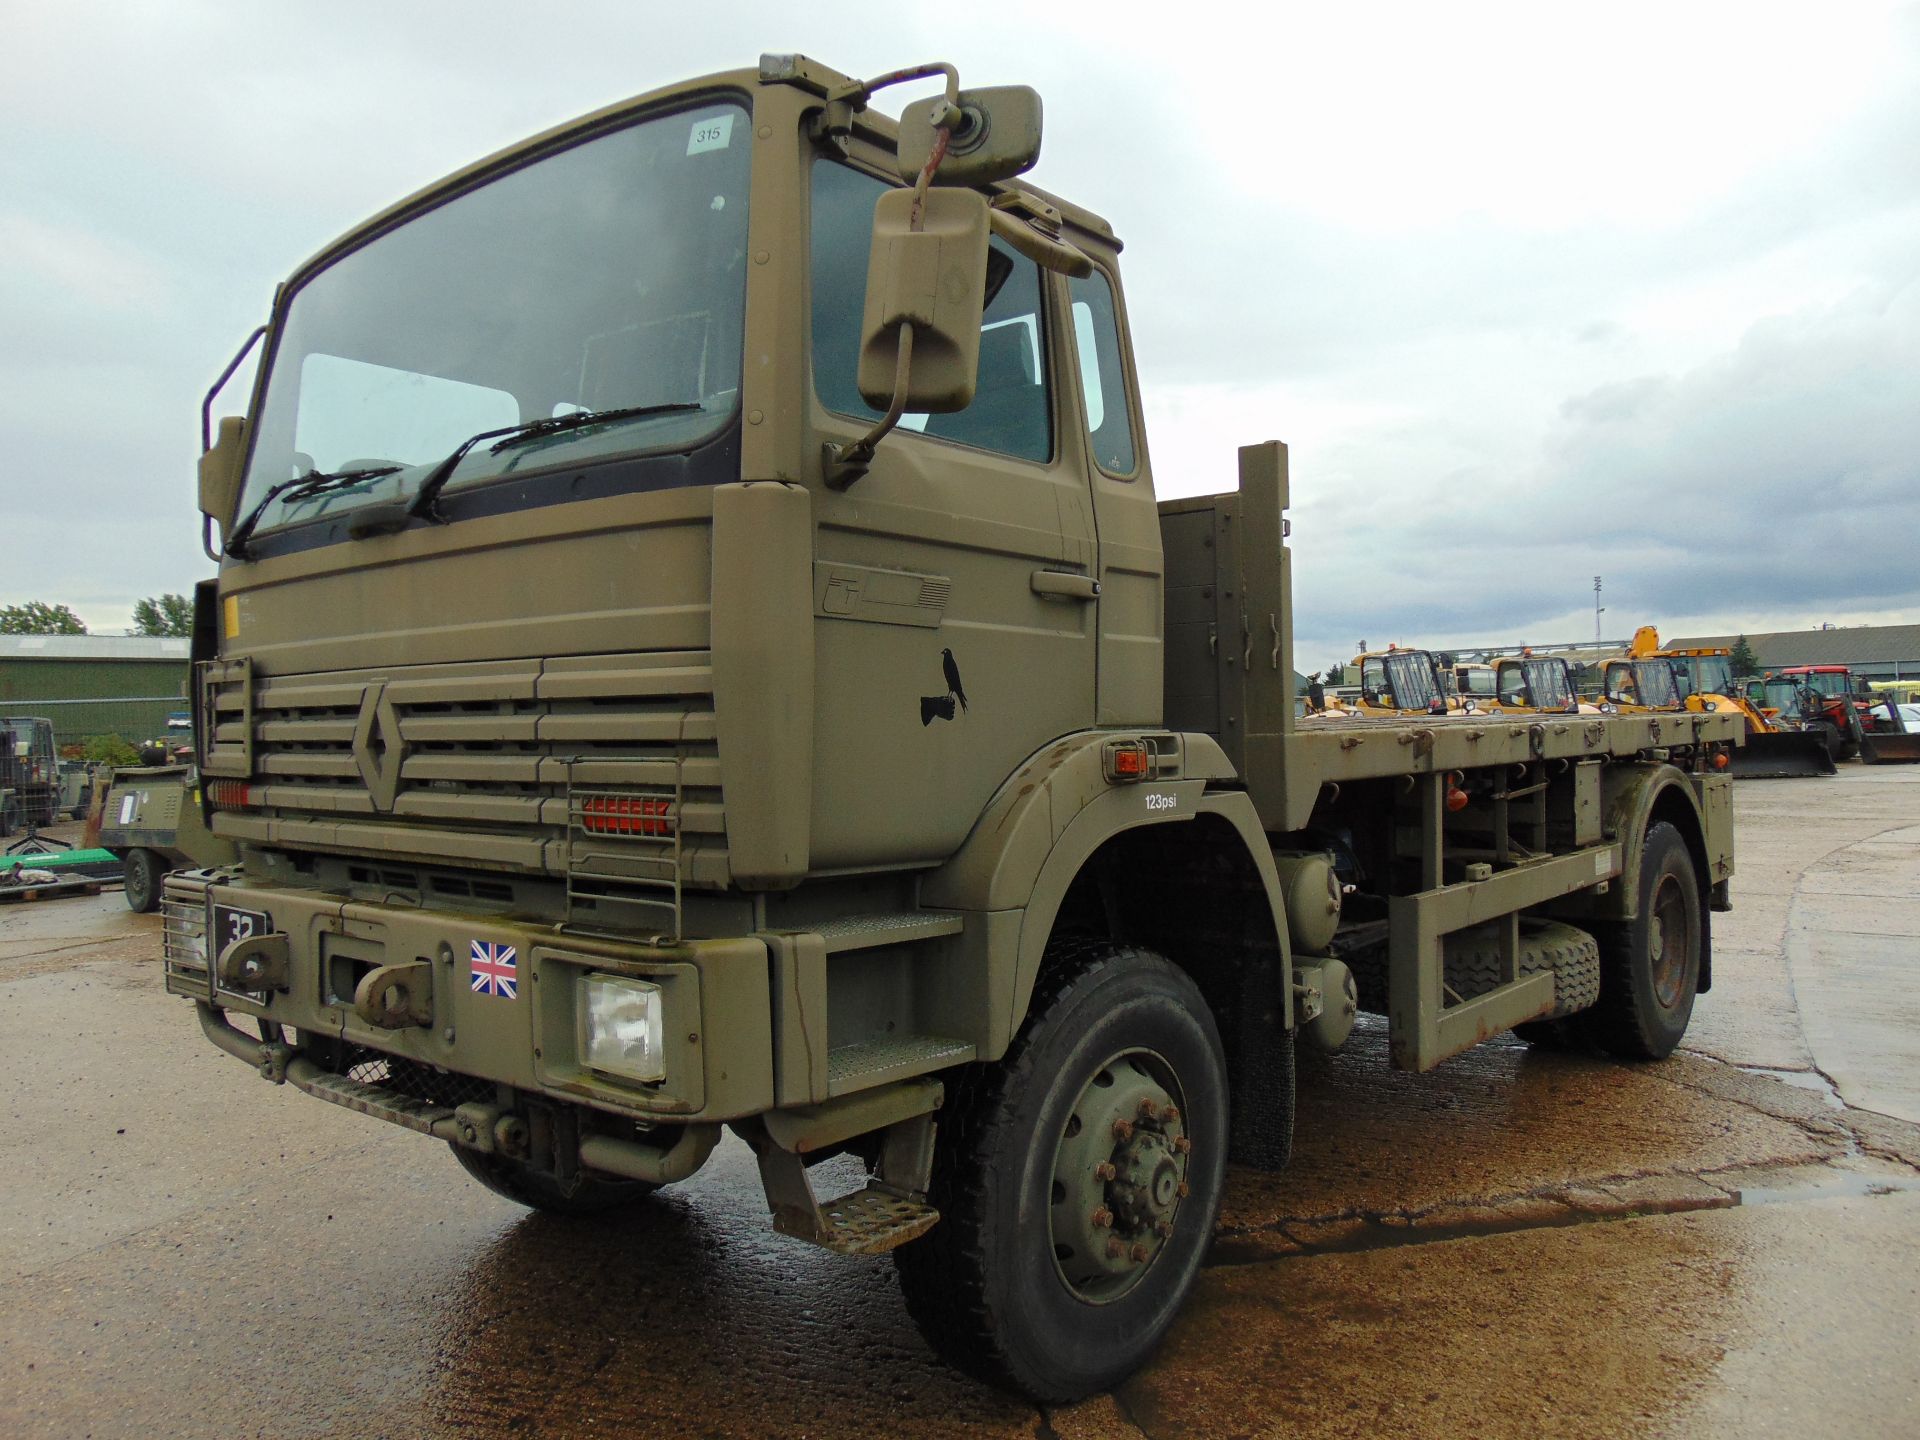 Renault G300 Maxter RHD 4x4 8T Cargo Truck complete with winch - Image 3 of 16